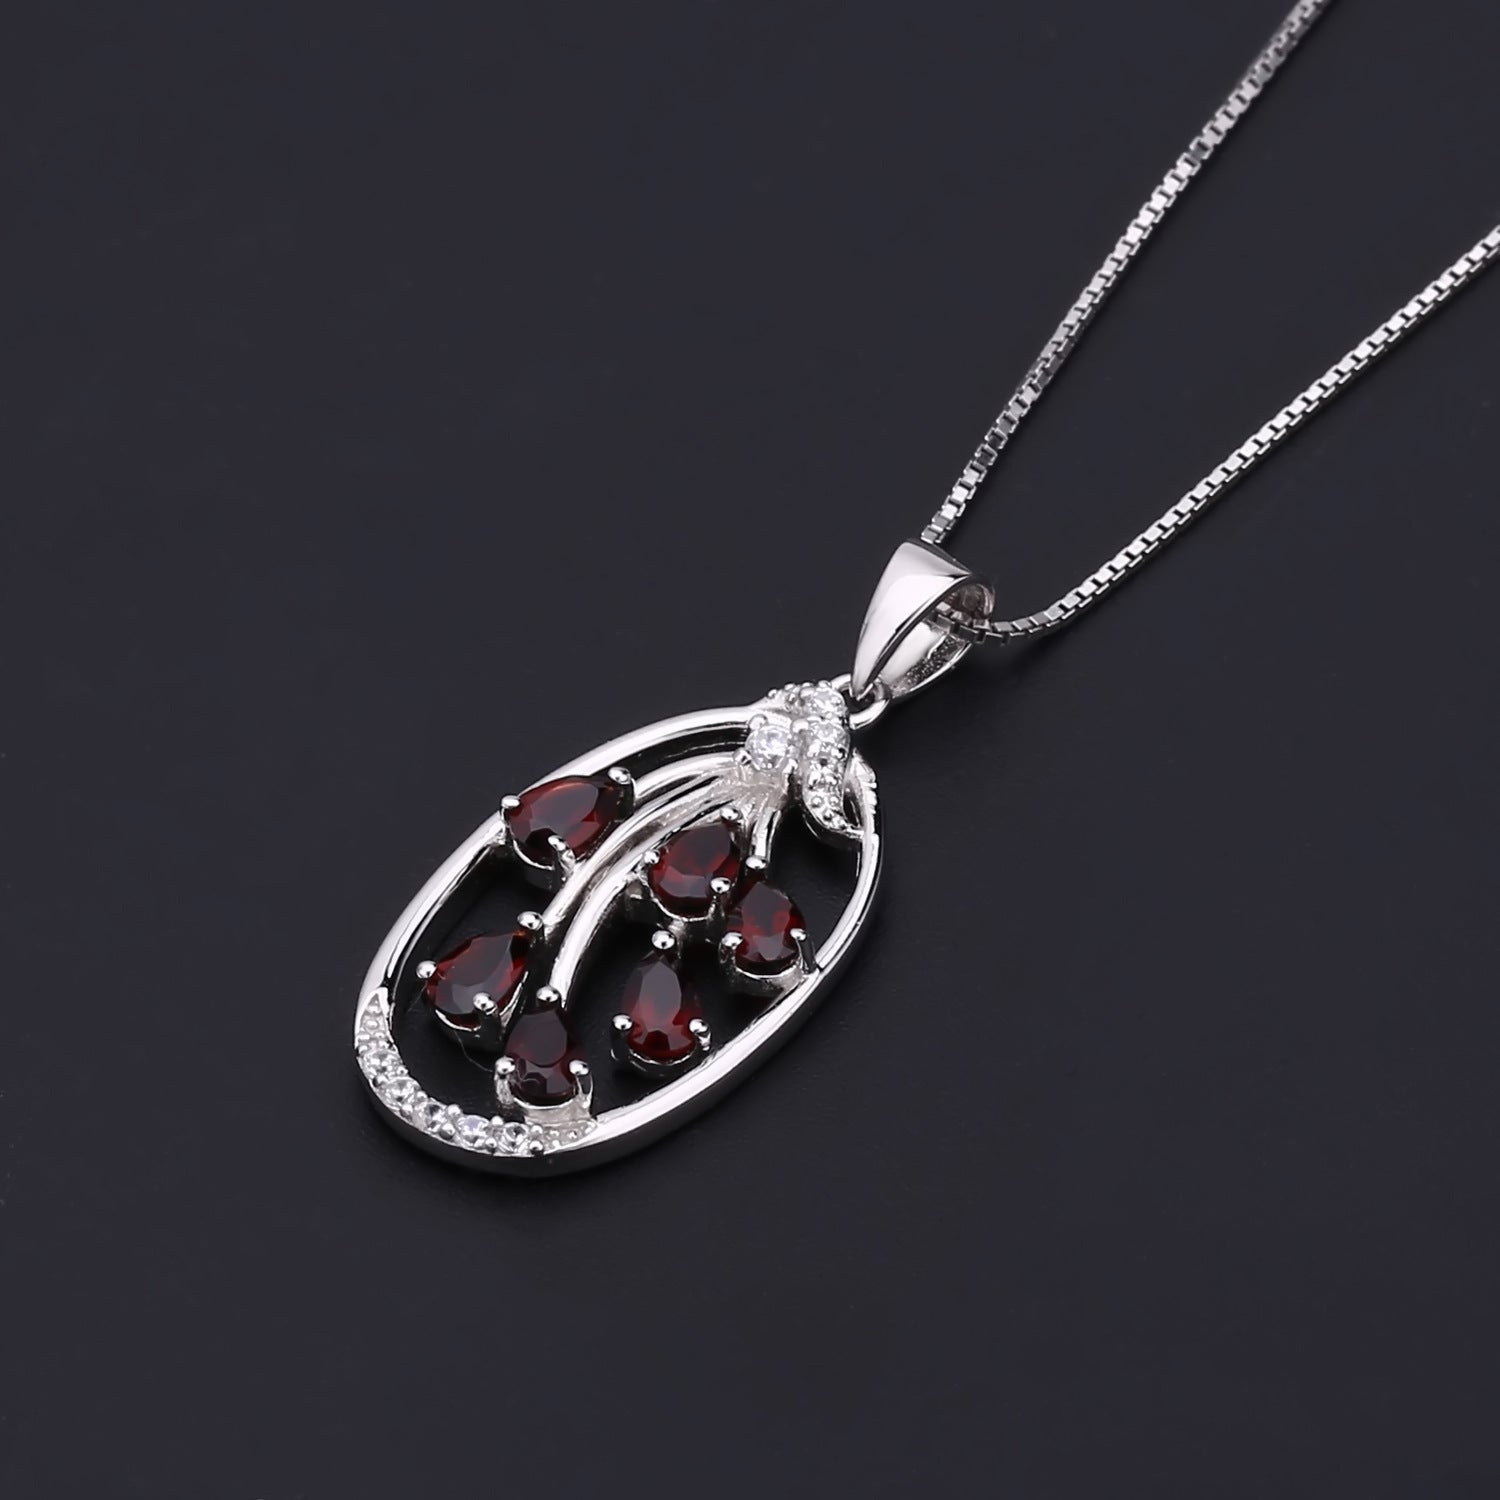 European Design Inlaid Green Crystal Pear Drop Pendant Silver Necklace for Women